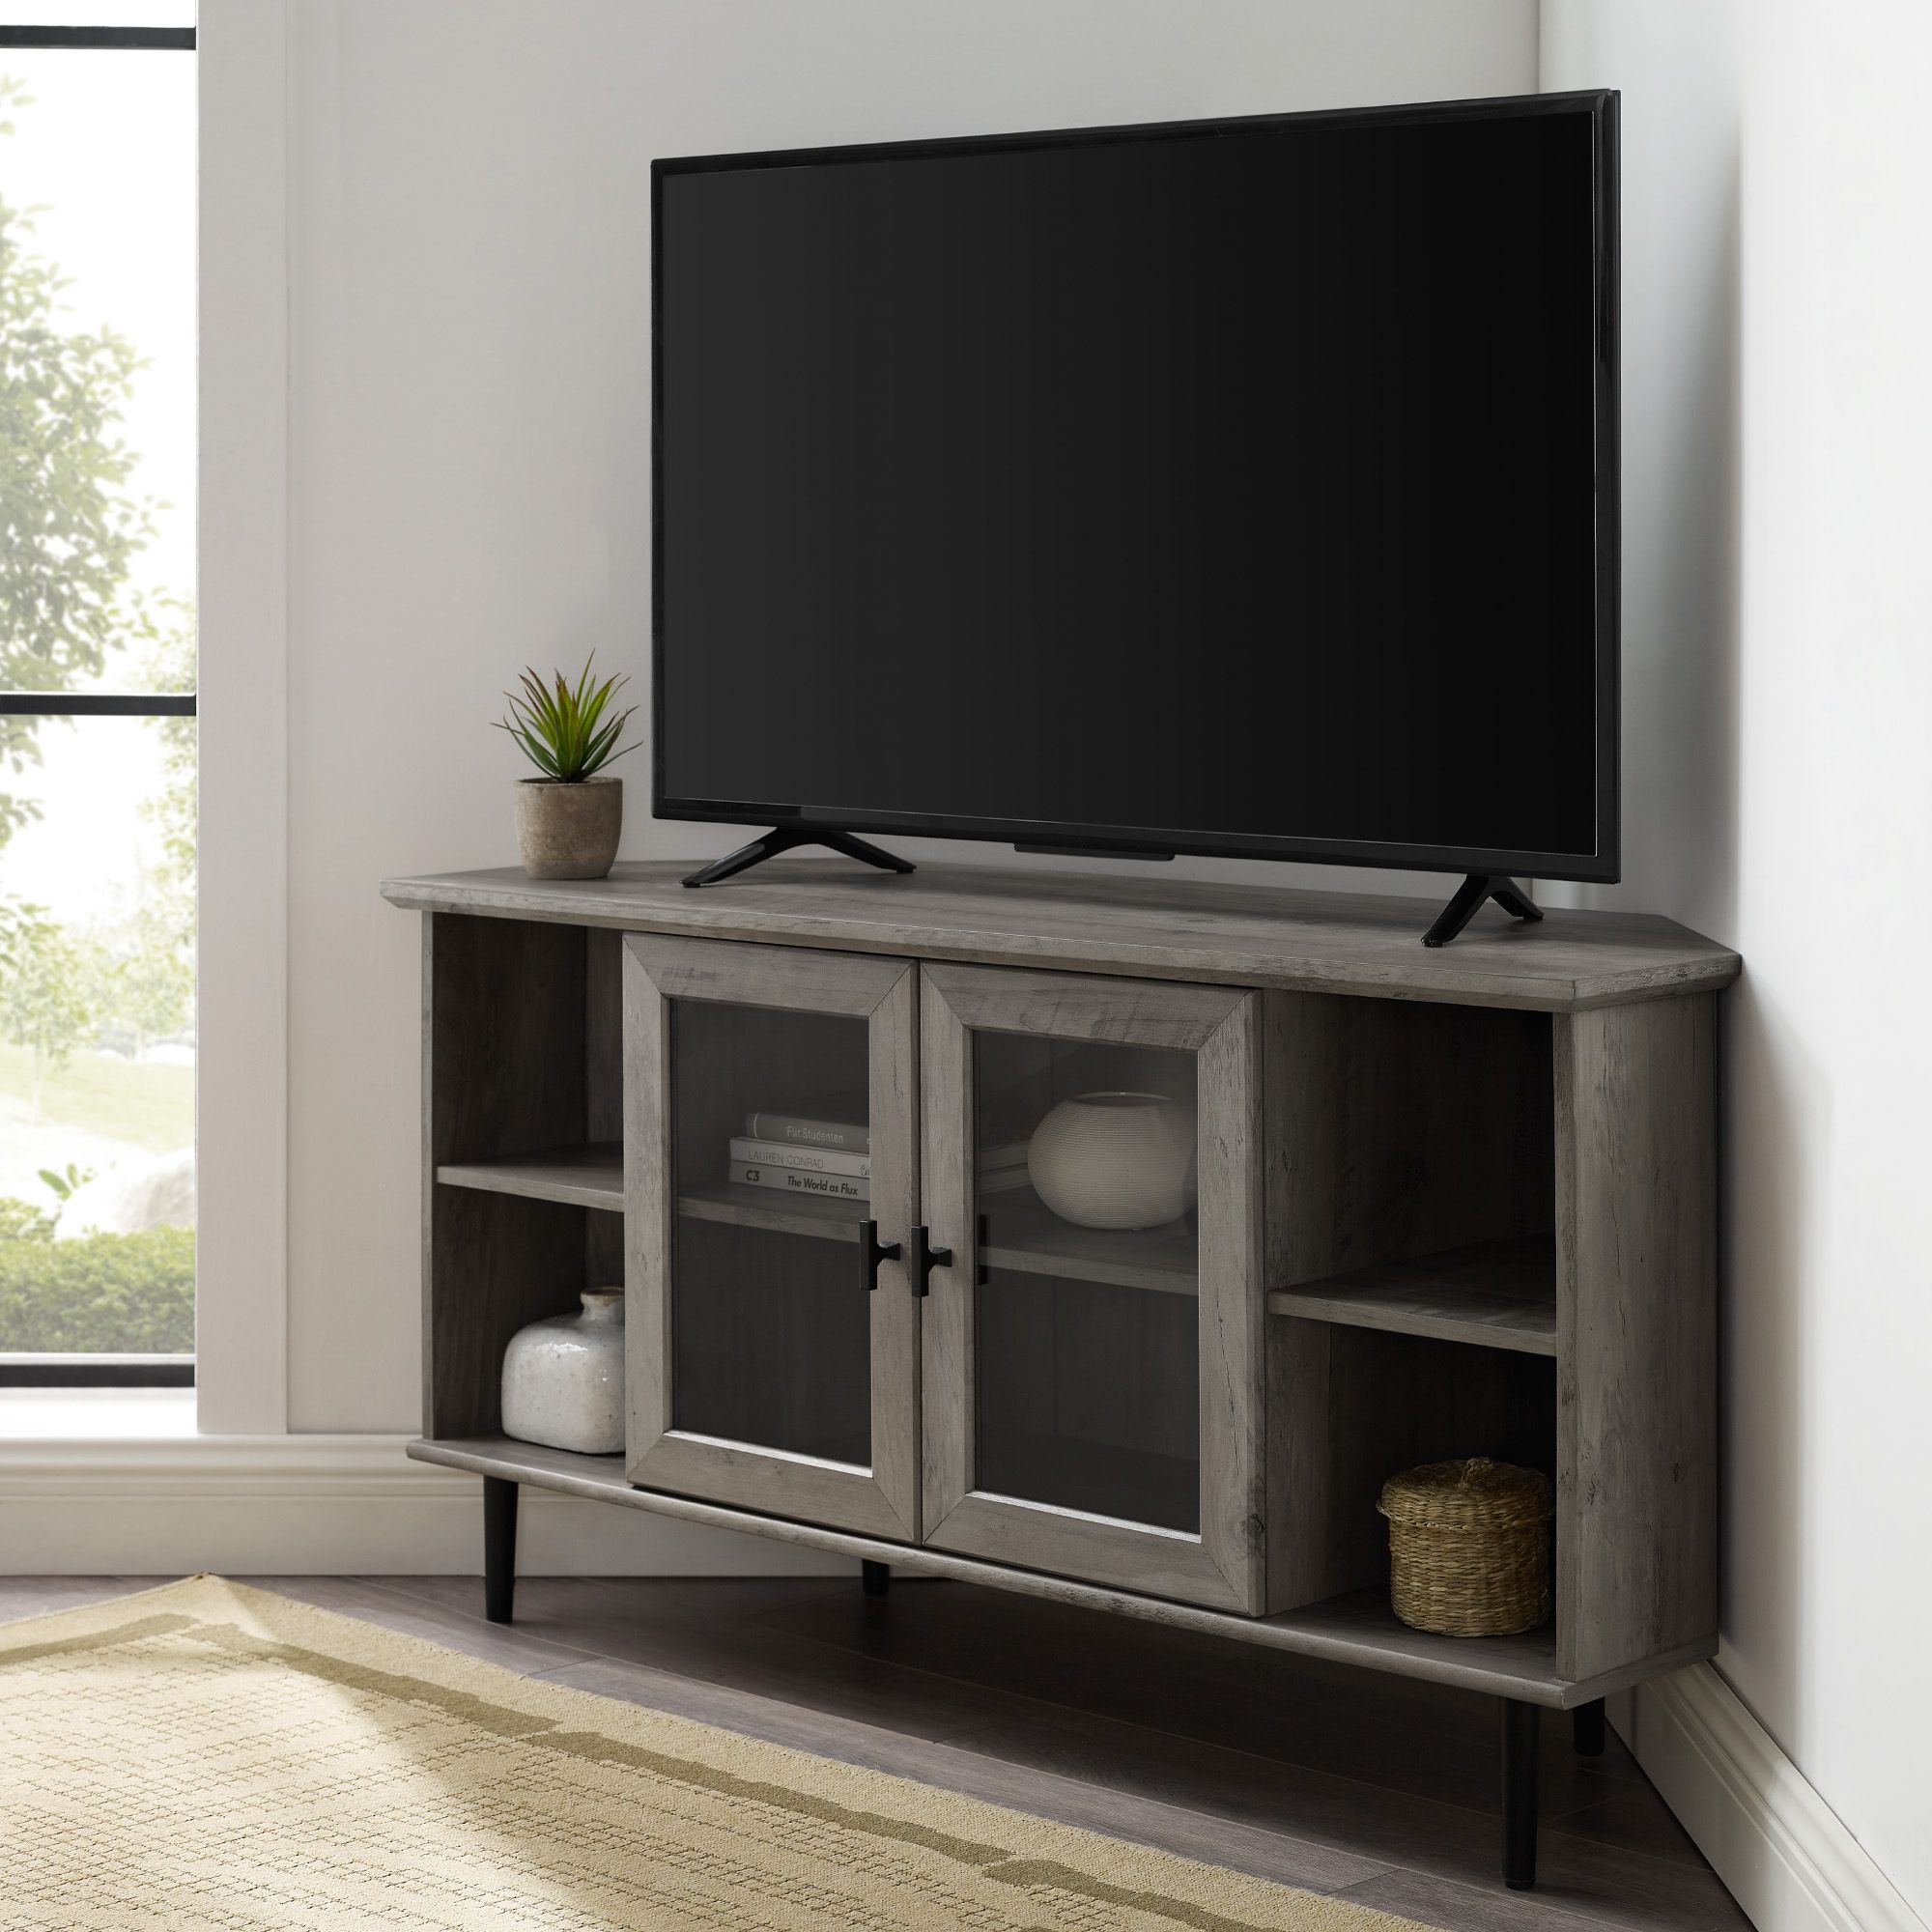 Manor Park Glass Door Corner Tv Stand For Tvs Up To 55 With Delphi Grey Tv Stands (View 1 of 15)